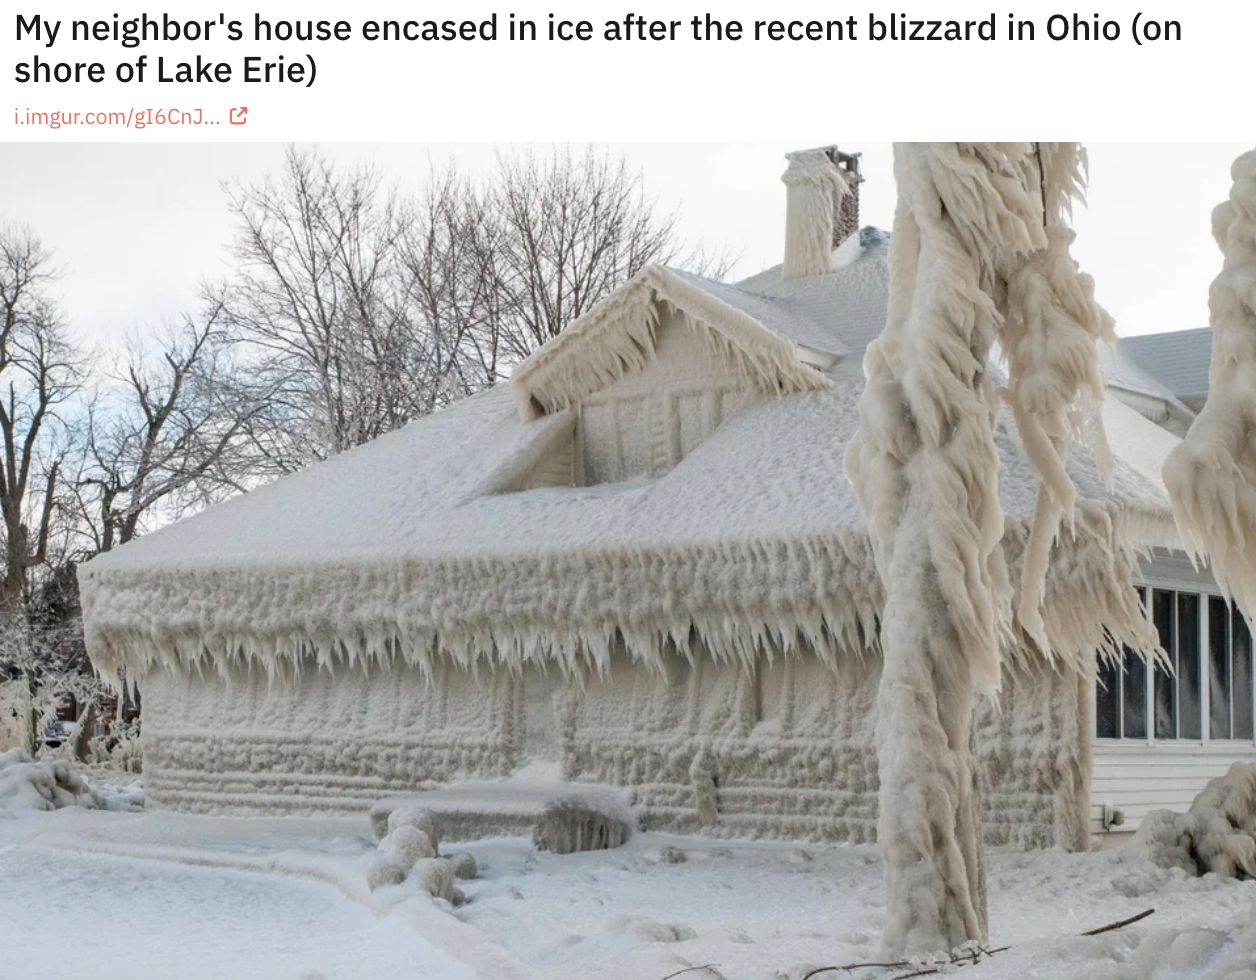 cool and funny pics - polar vortex frozen home - My neighbor's house encased in ice after the recent blizzard in Ohio on shore of Lake Erie